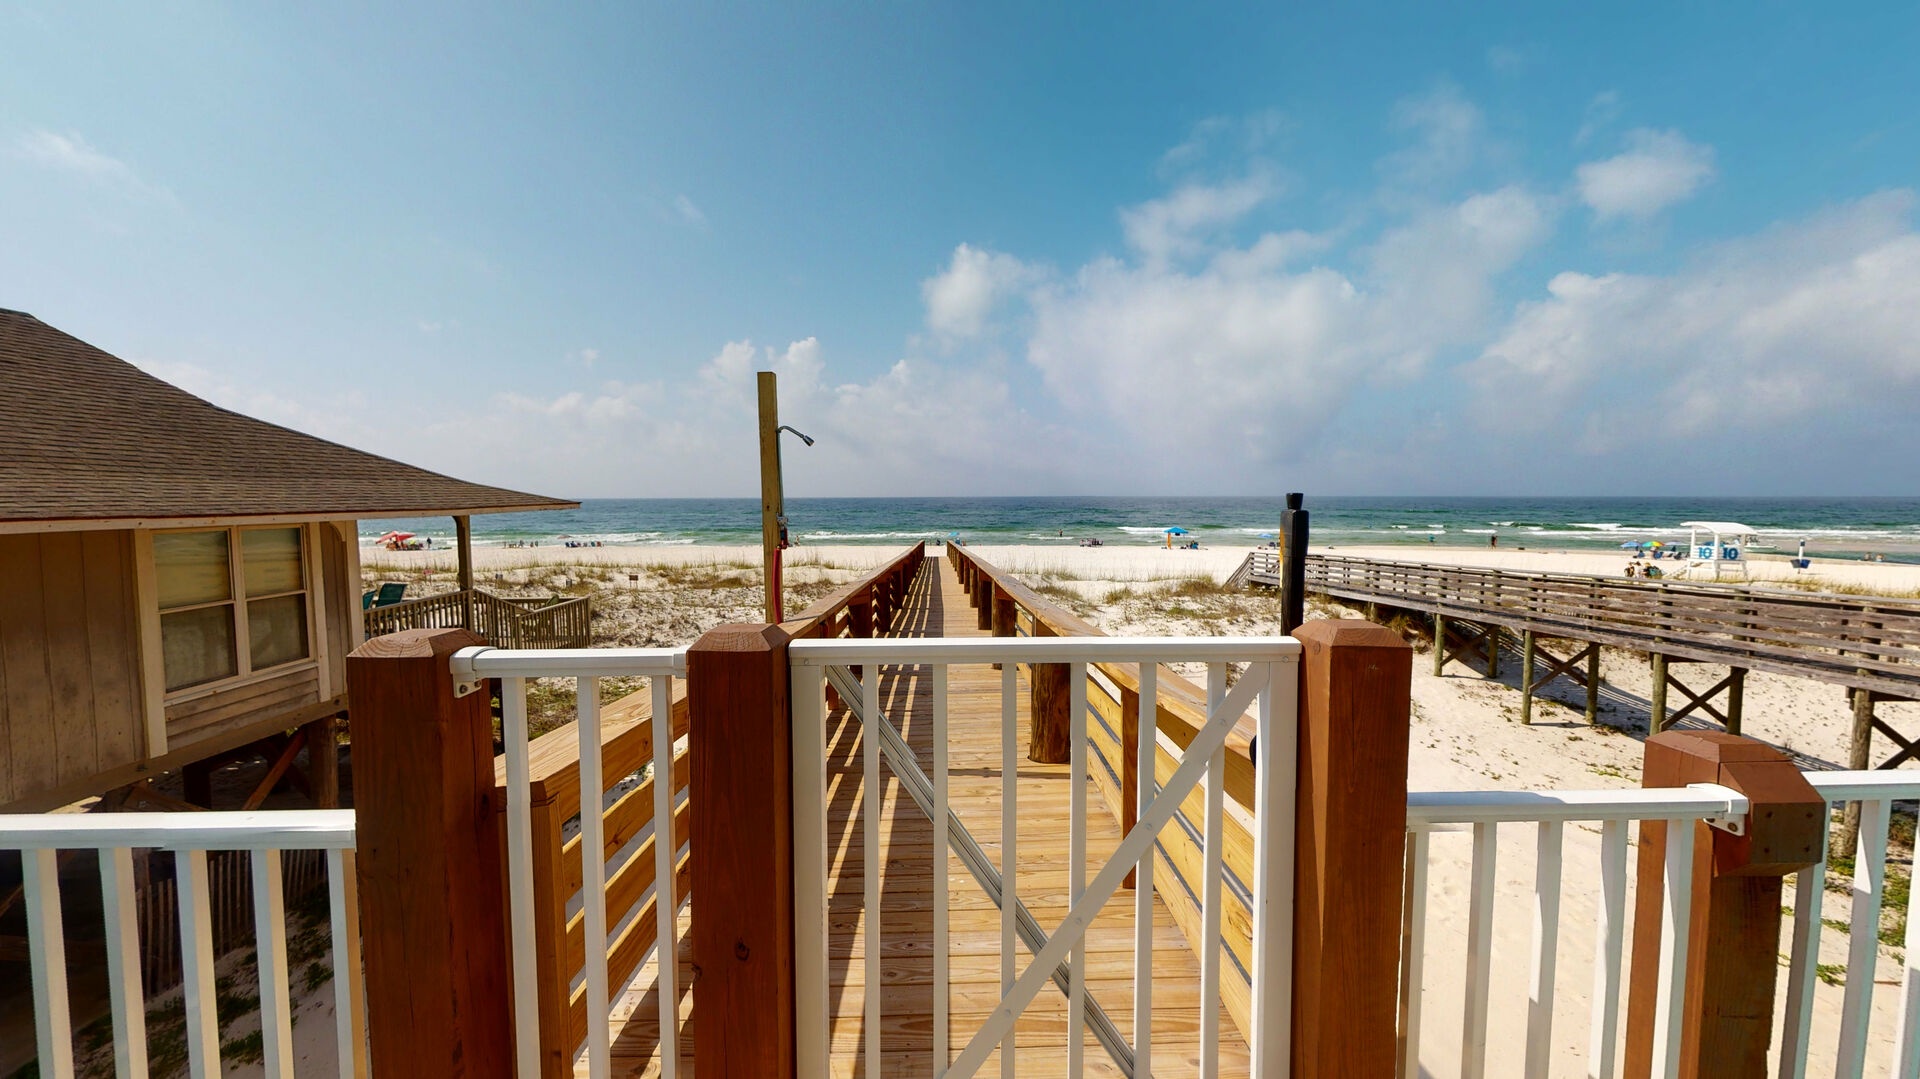 The beach walk-over has a gate and an outdoor shower